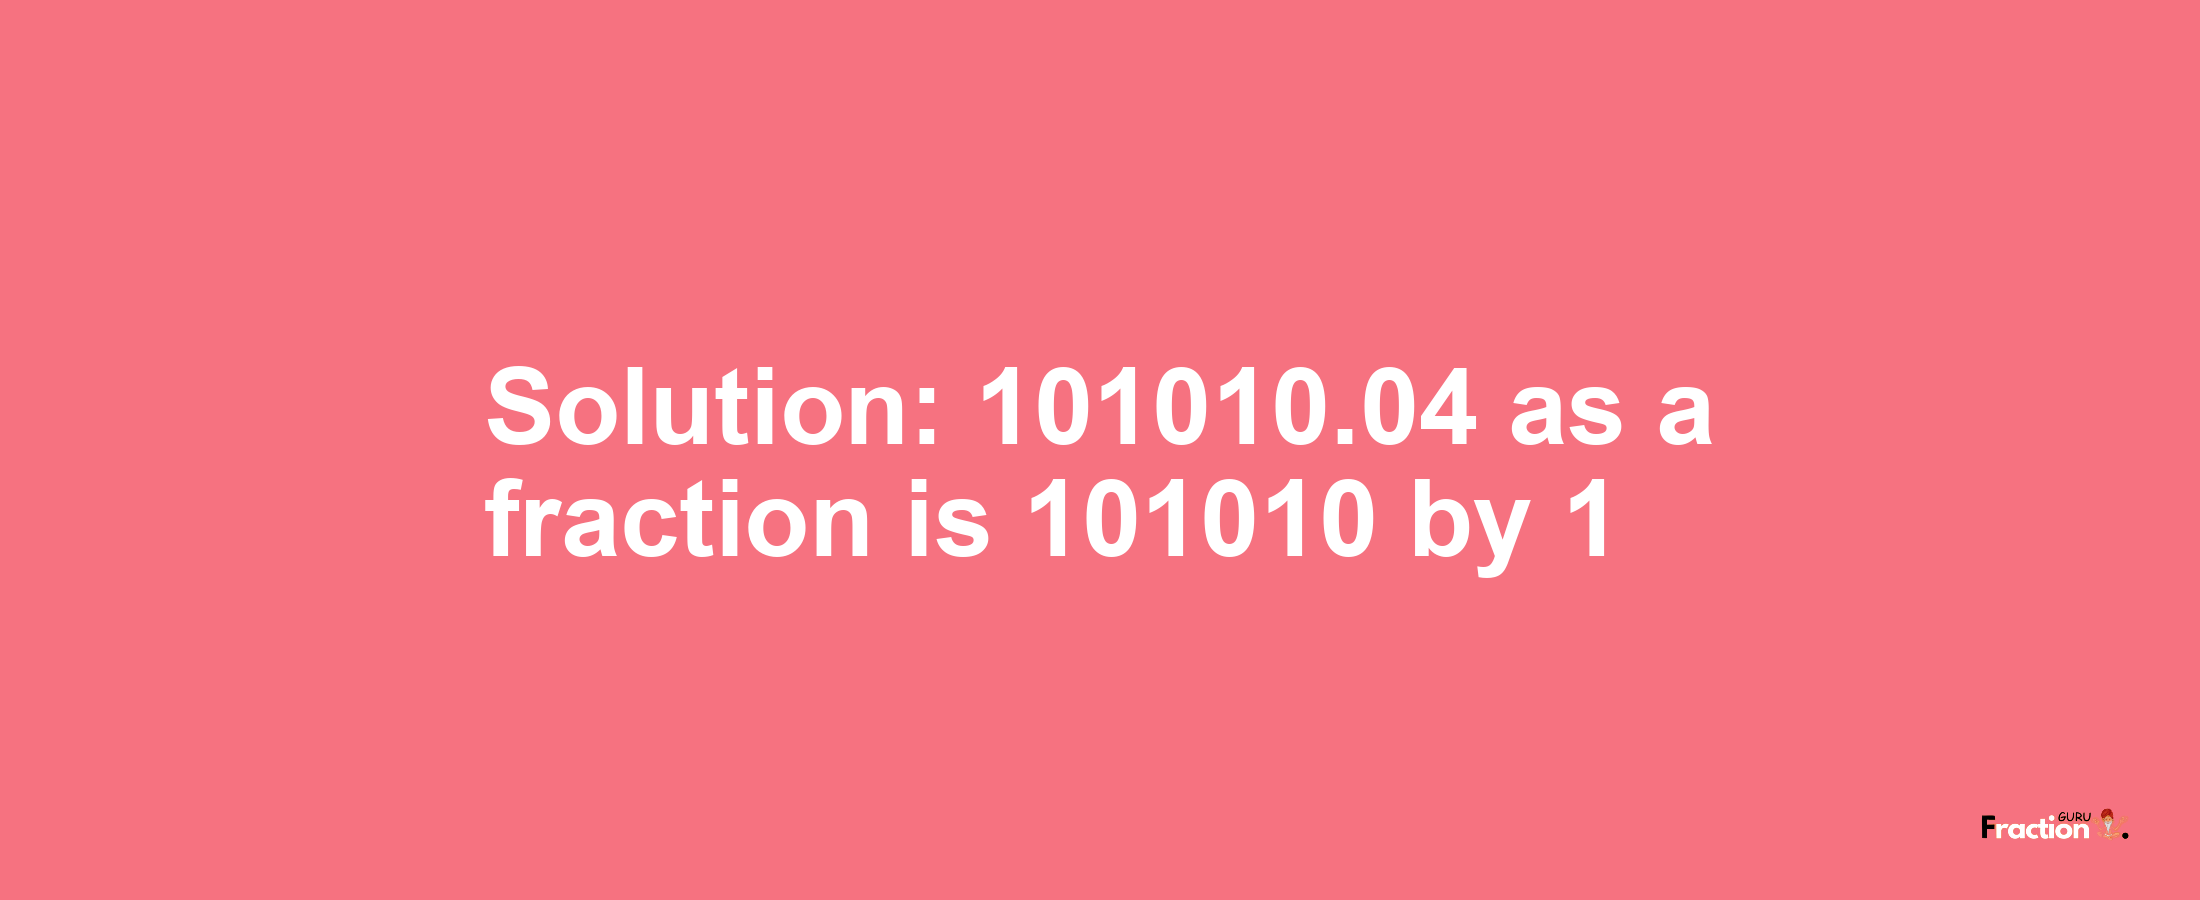 Solution:101010.04 as a fraction is 101010/1